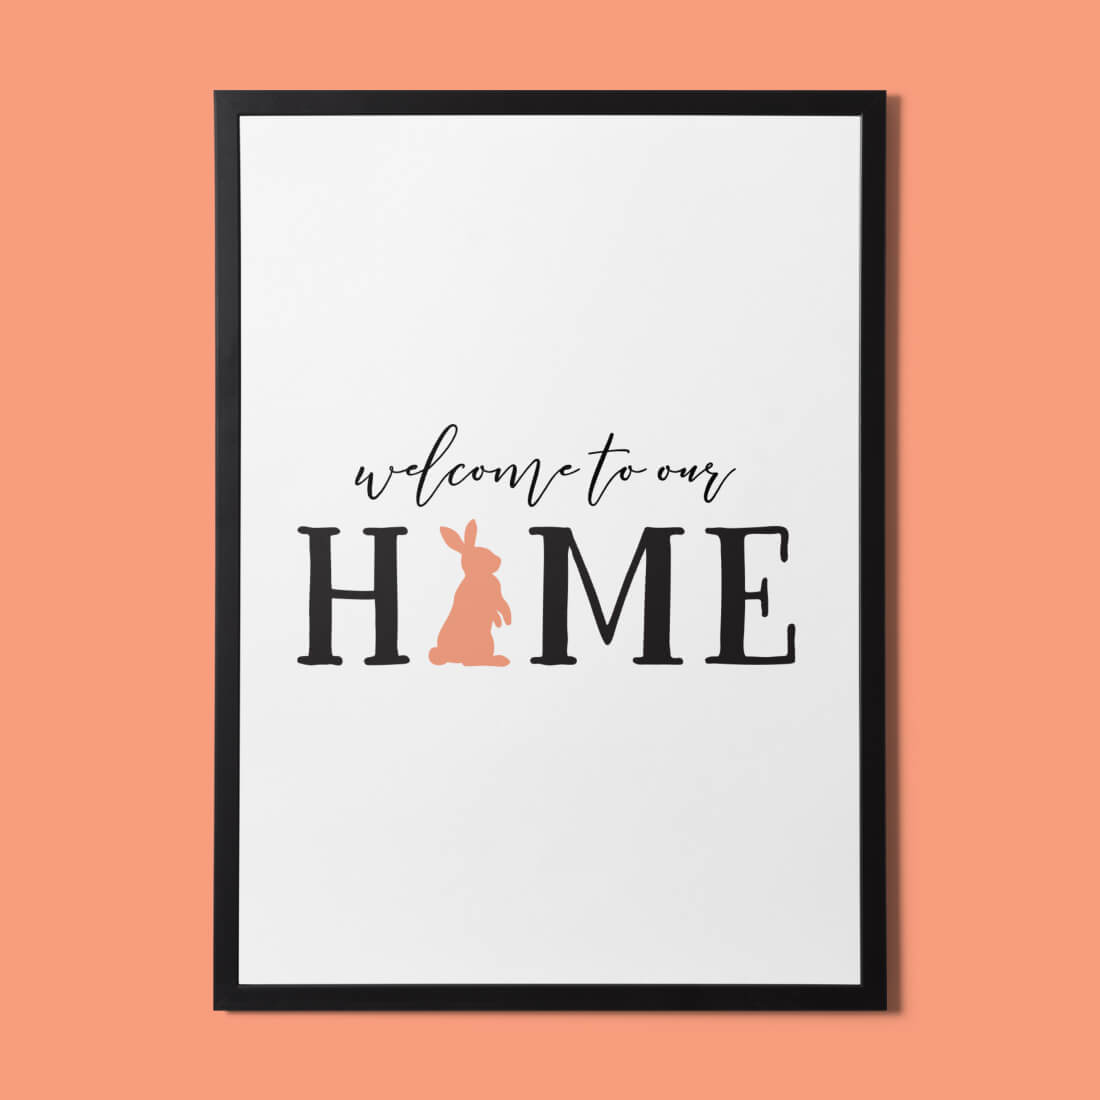 "Welcome to our home" is written on the picture with a black frame.